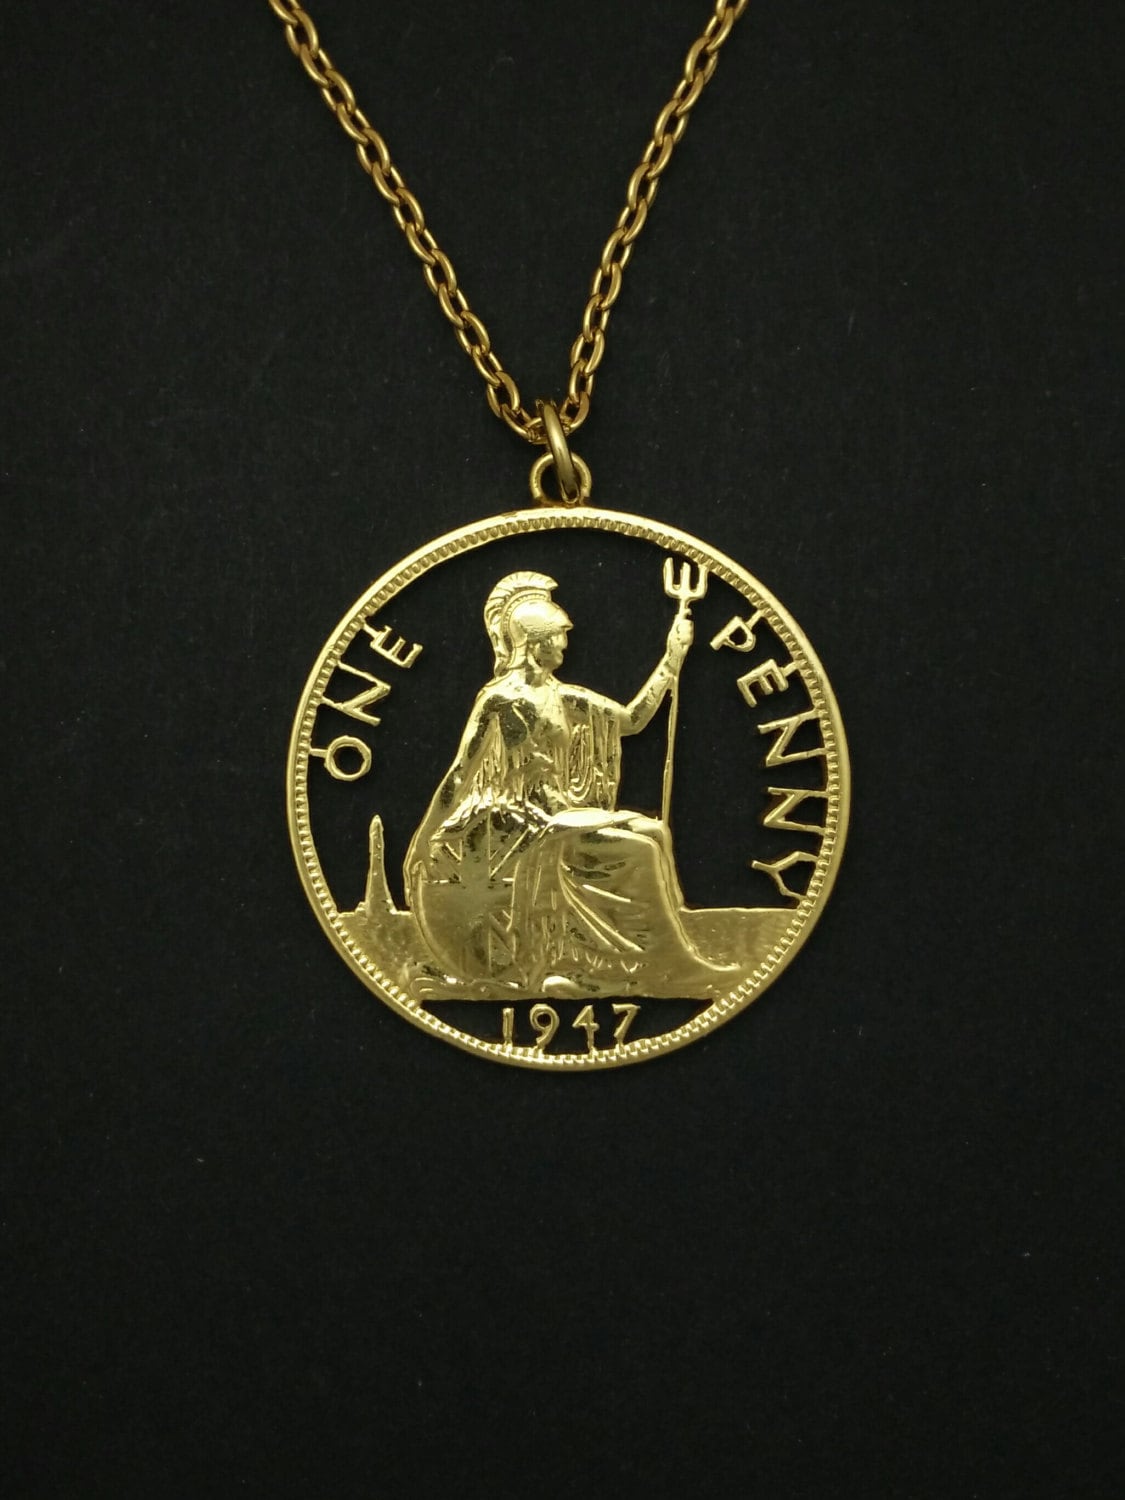 1947 Farthing Coin Gold Plated Pendant ready to hang 